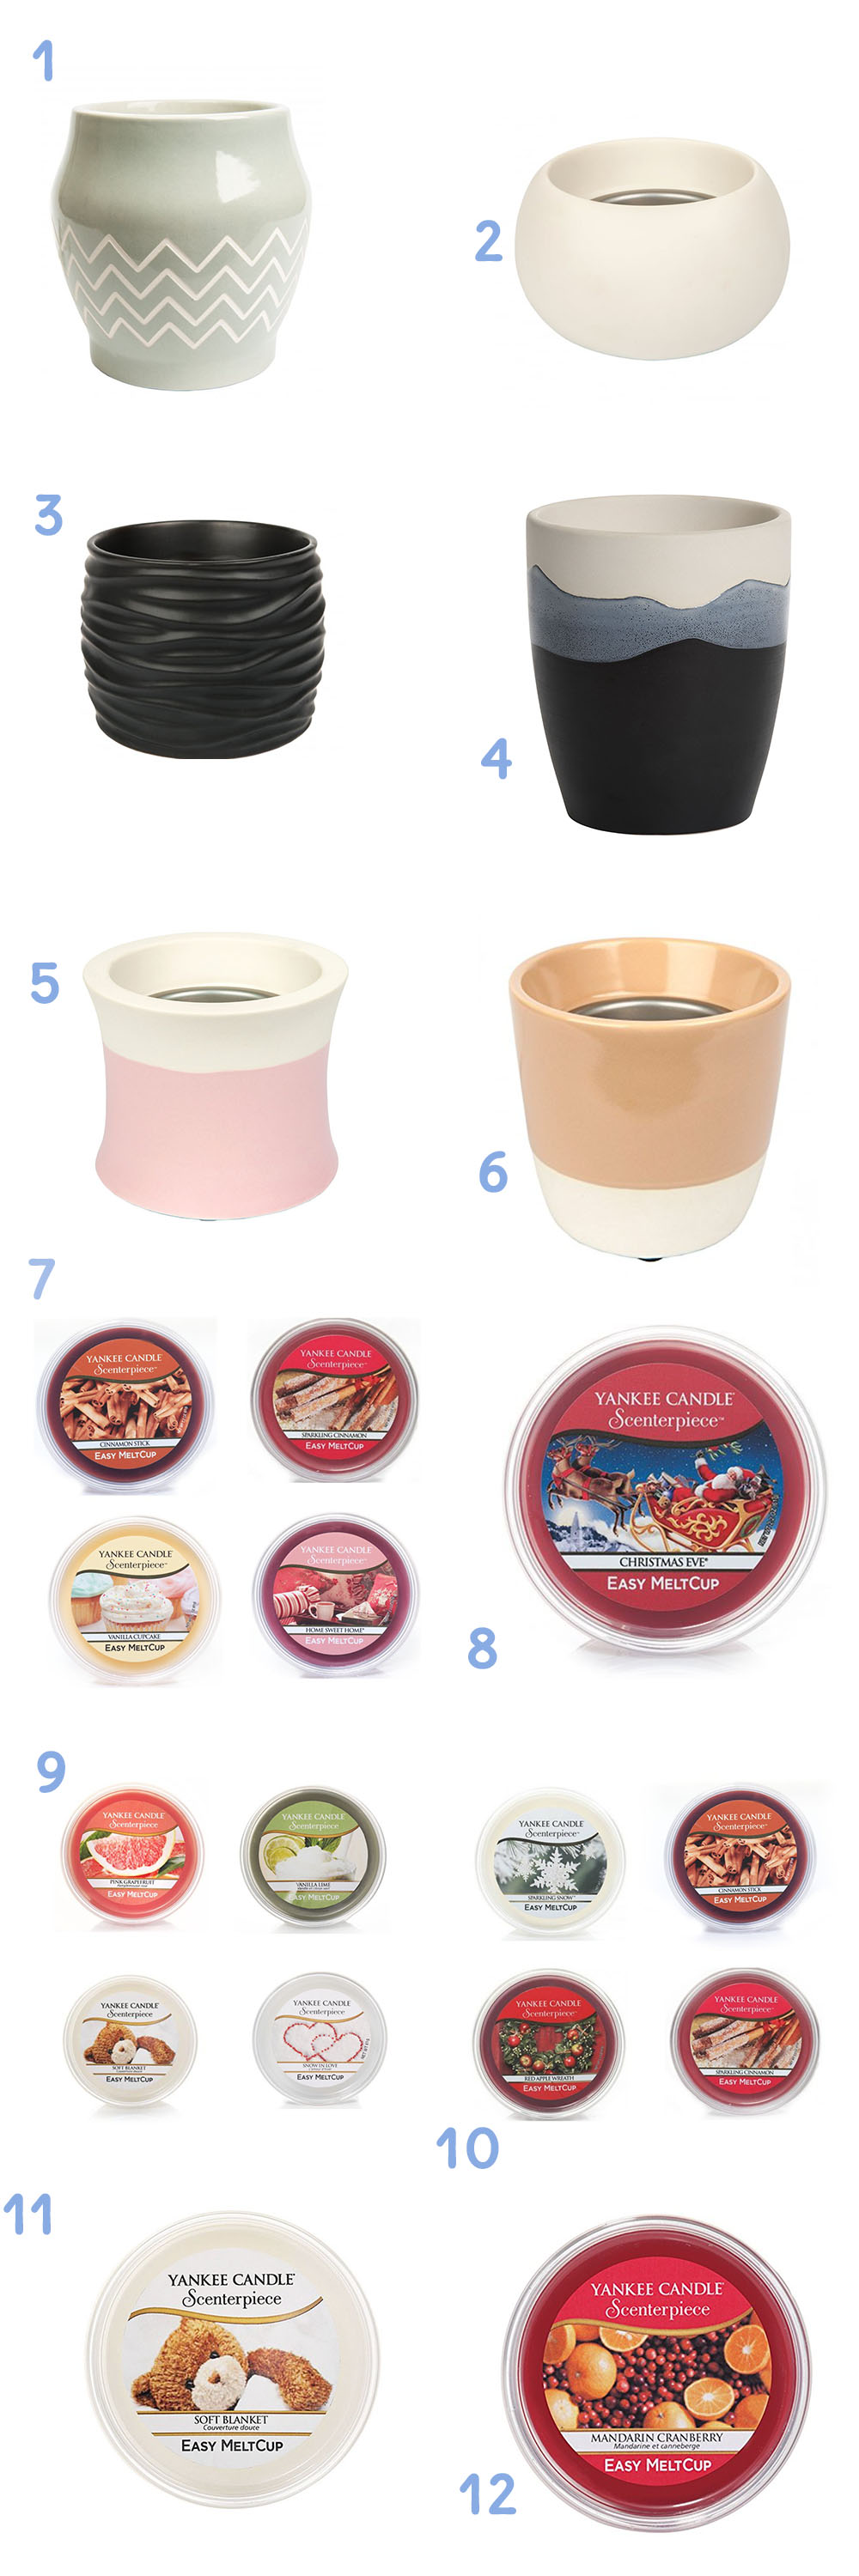 Scenterpiece Melt Cup Warmer Review by Yankee Candle - Prettygreentea